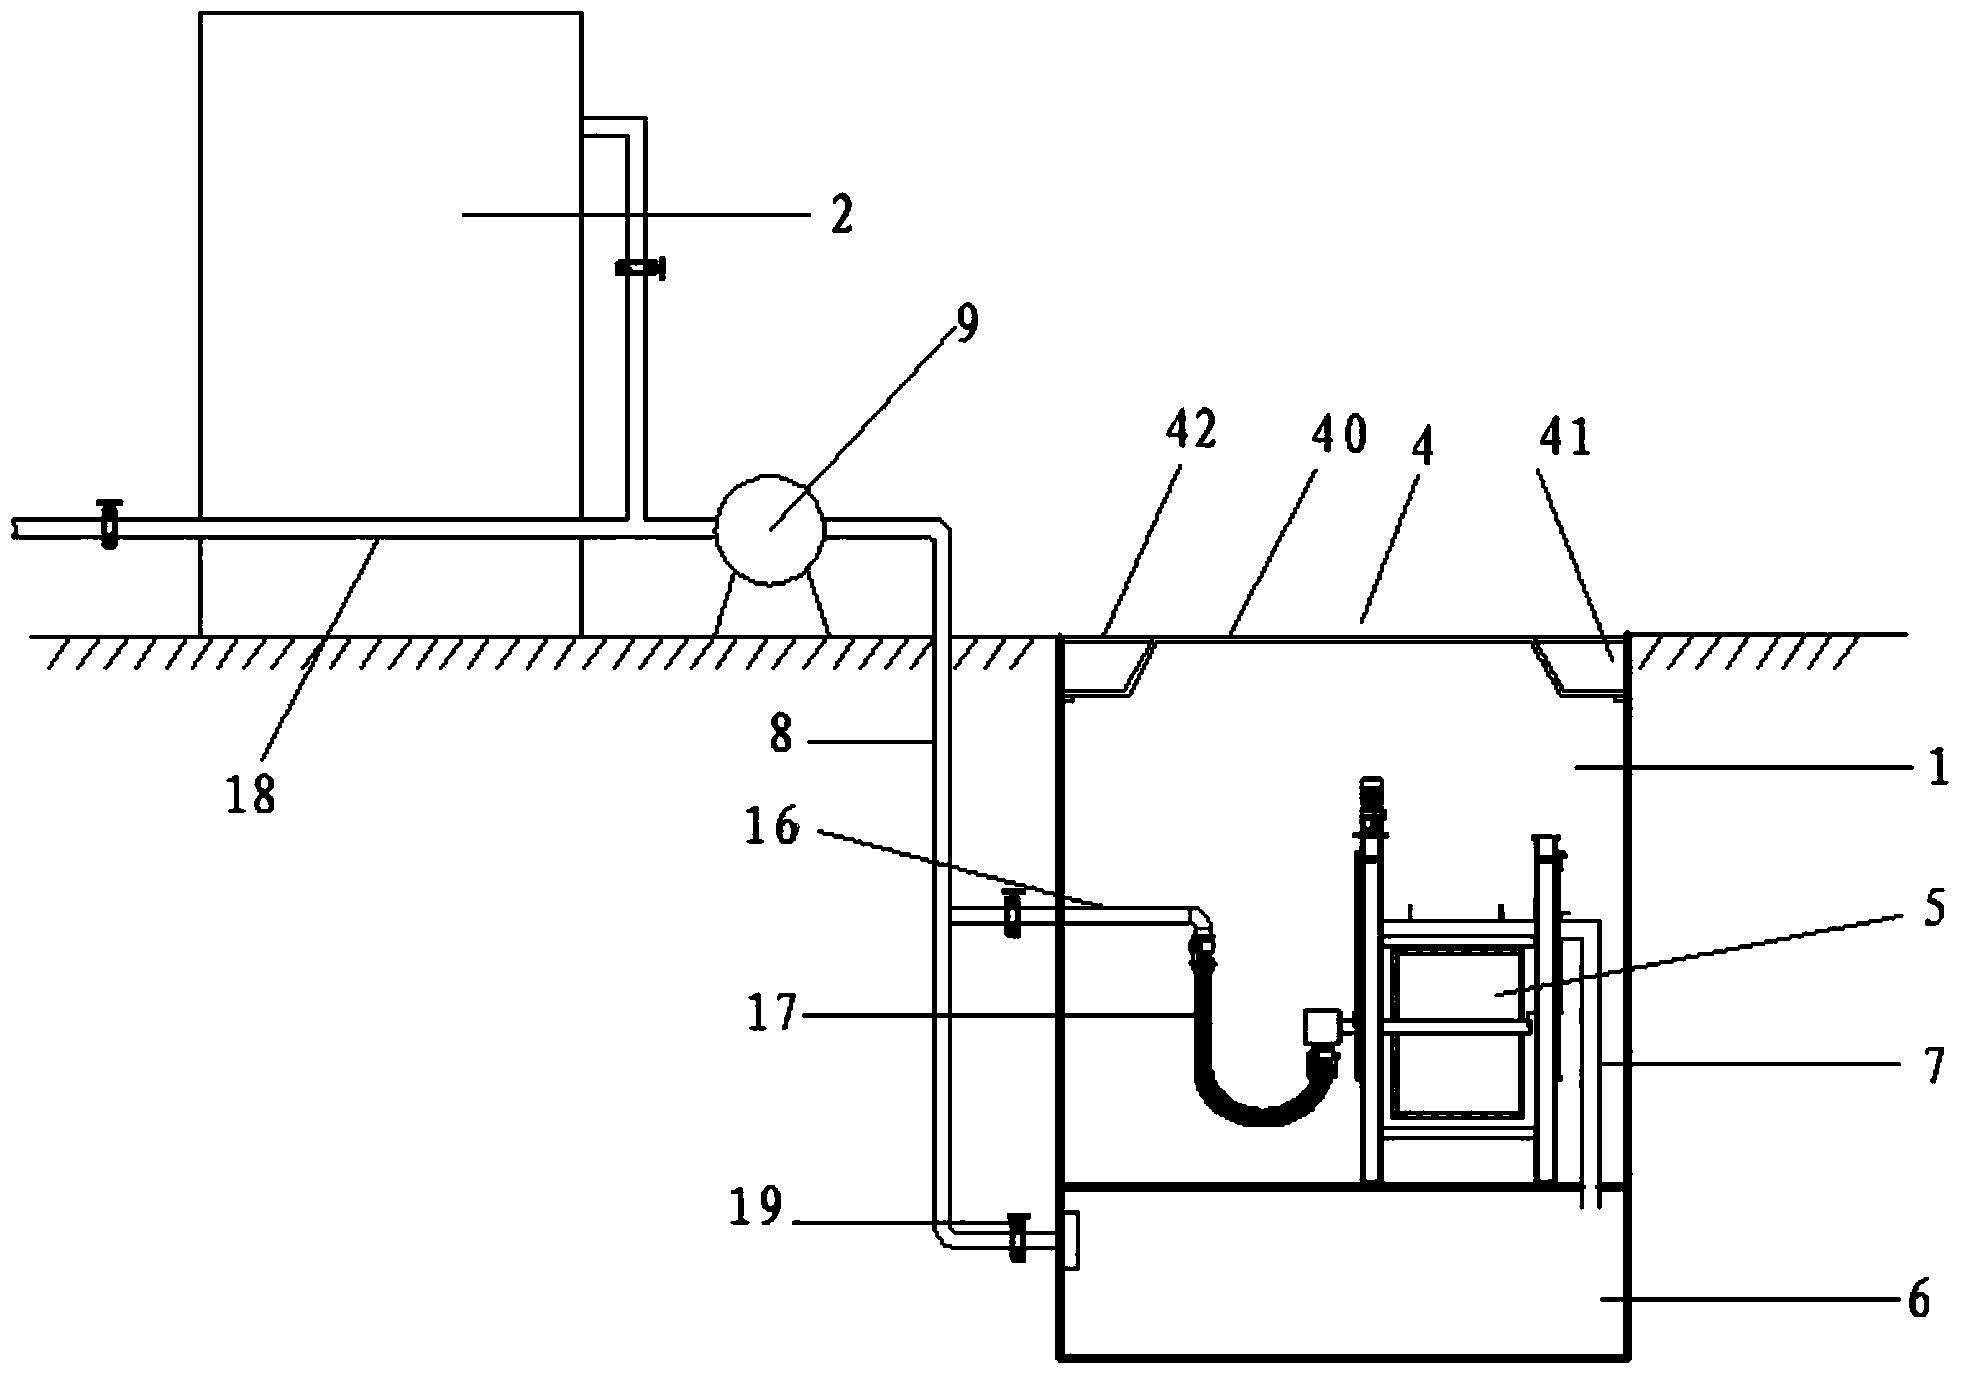 Park rainwater collecting and processing system